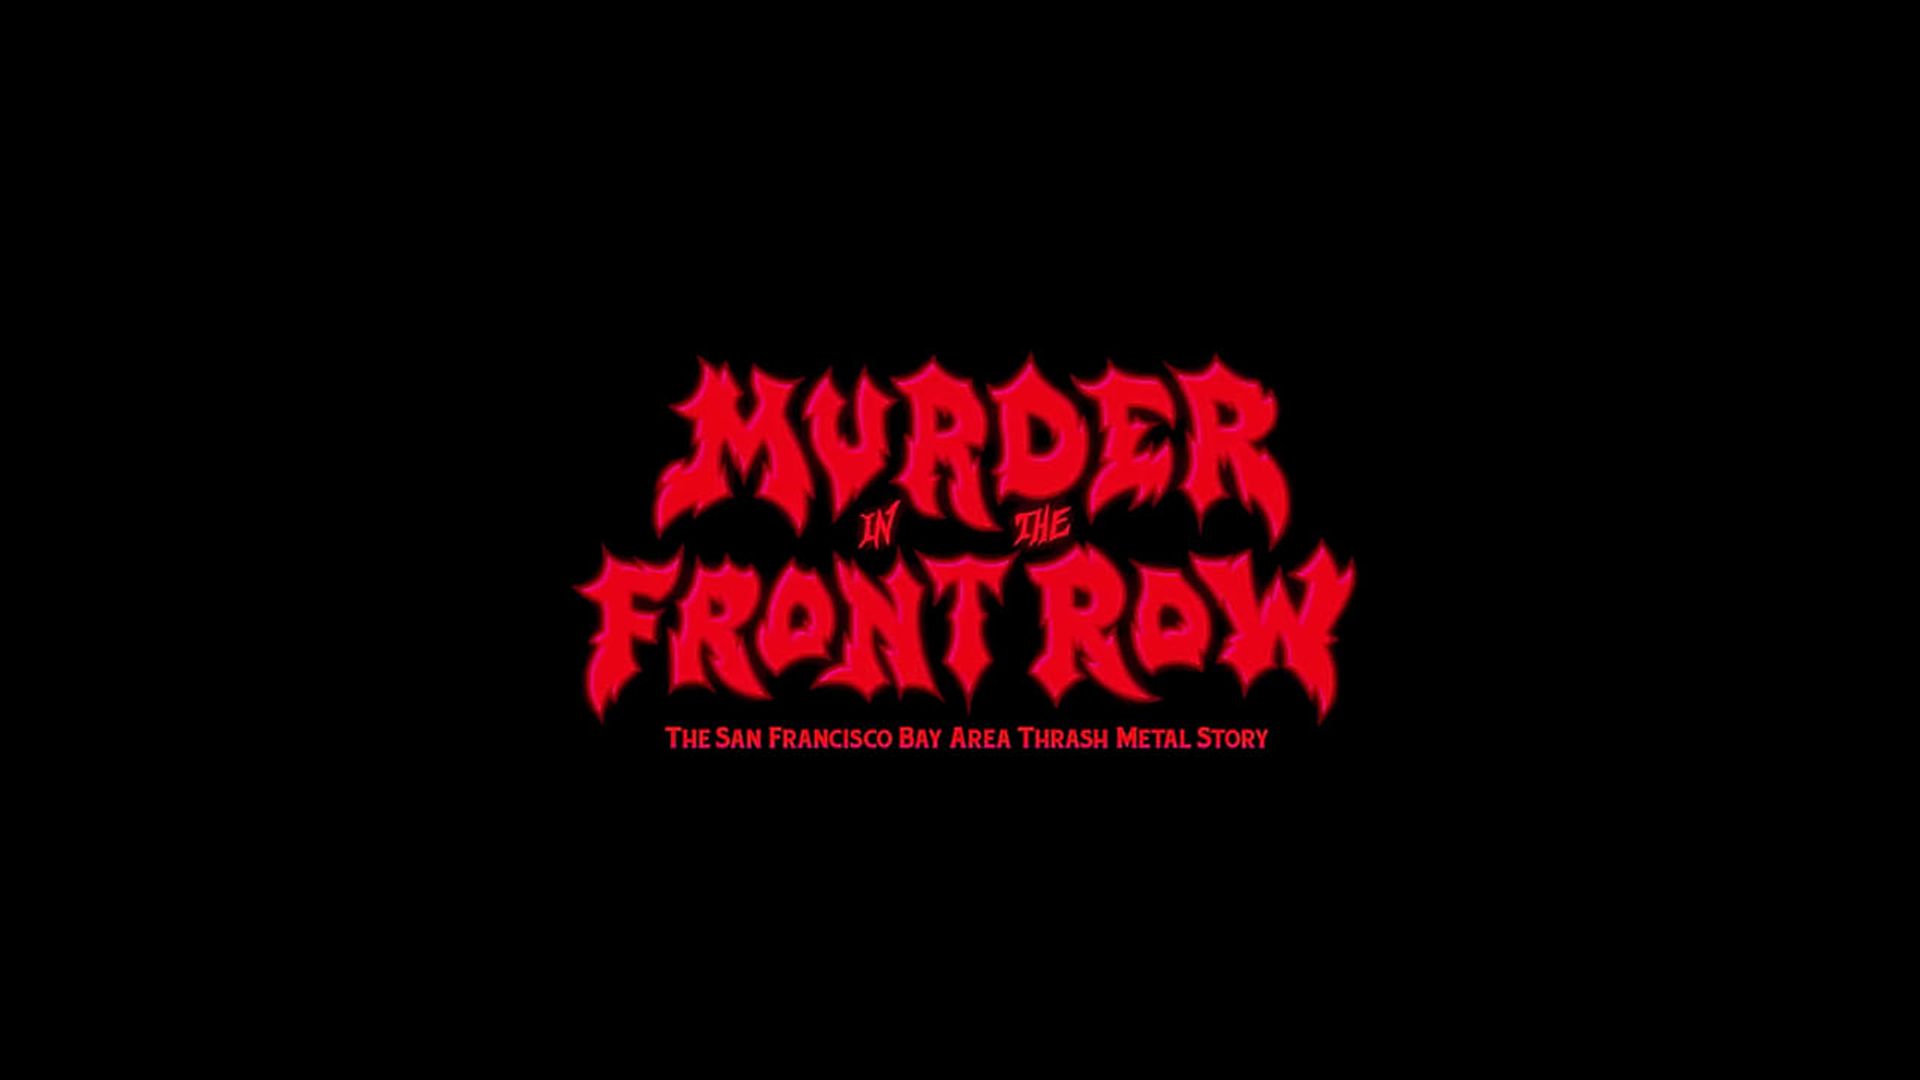 Murder in the Front Row: The San Francisco Bay Area Thrash Metal Story background